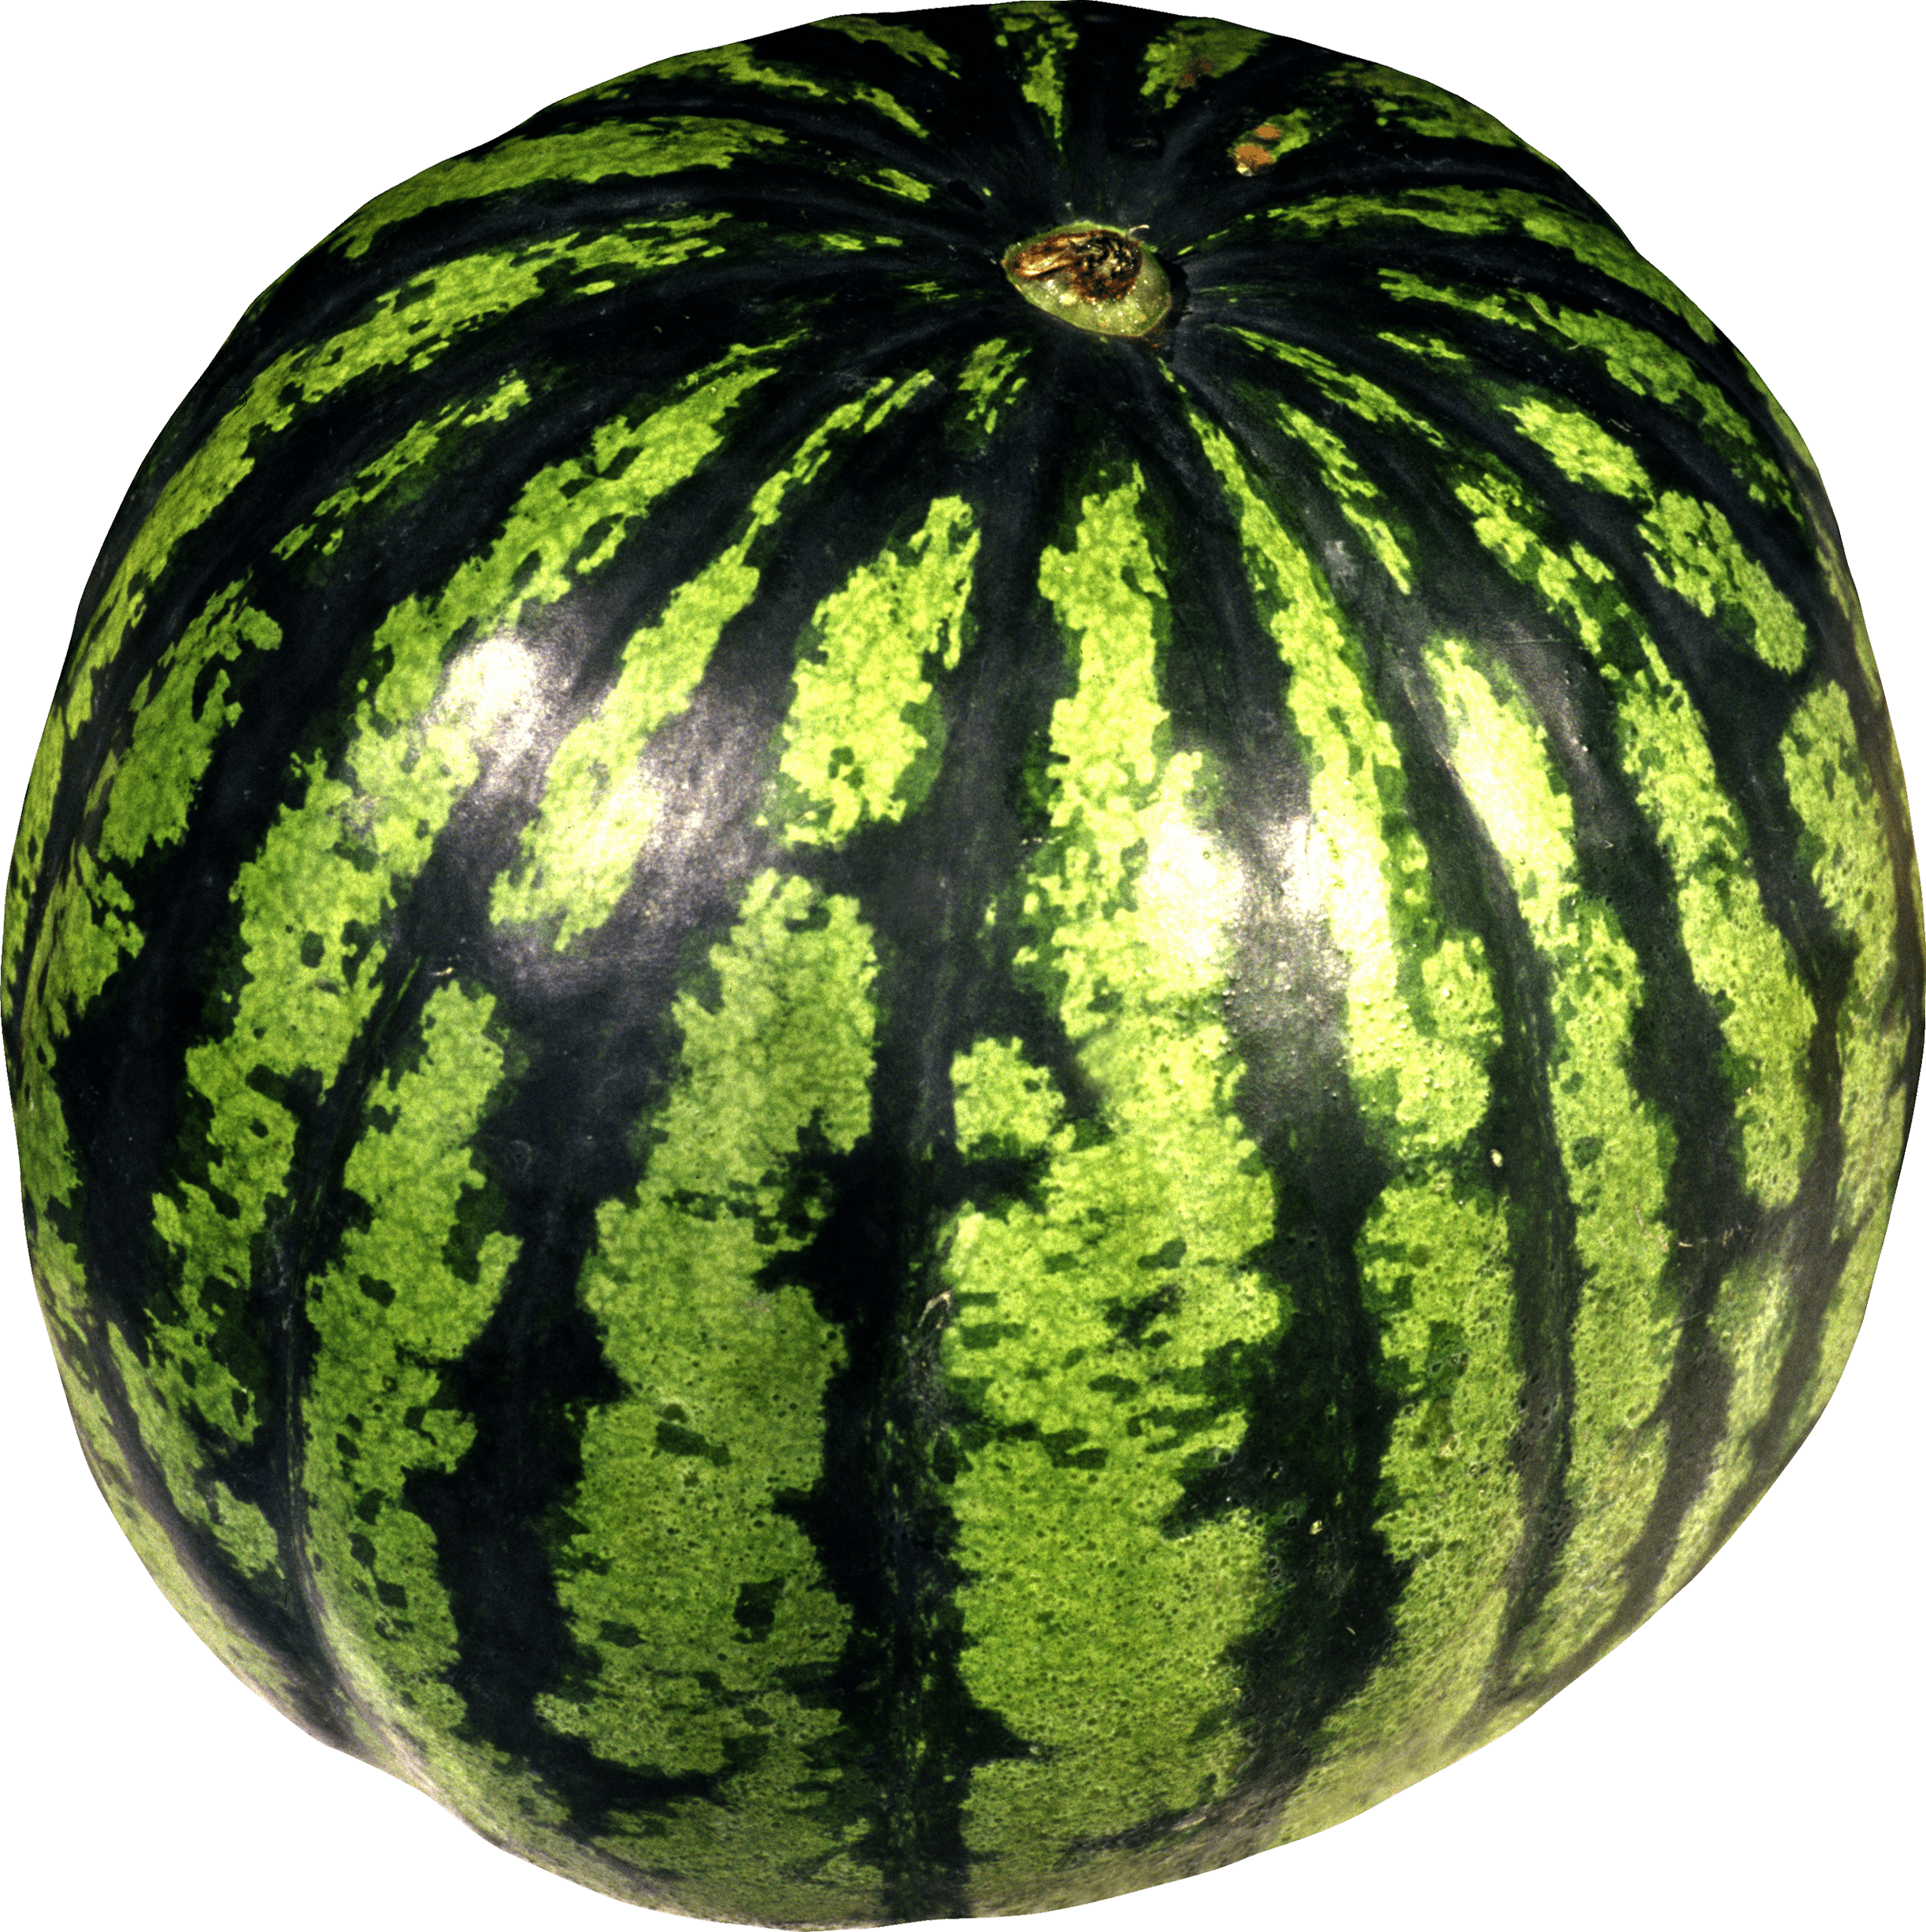 watermelon PNG image, picture